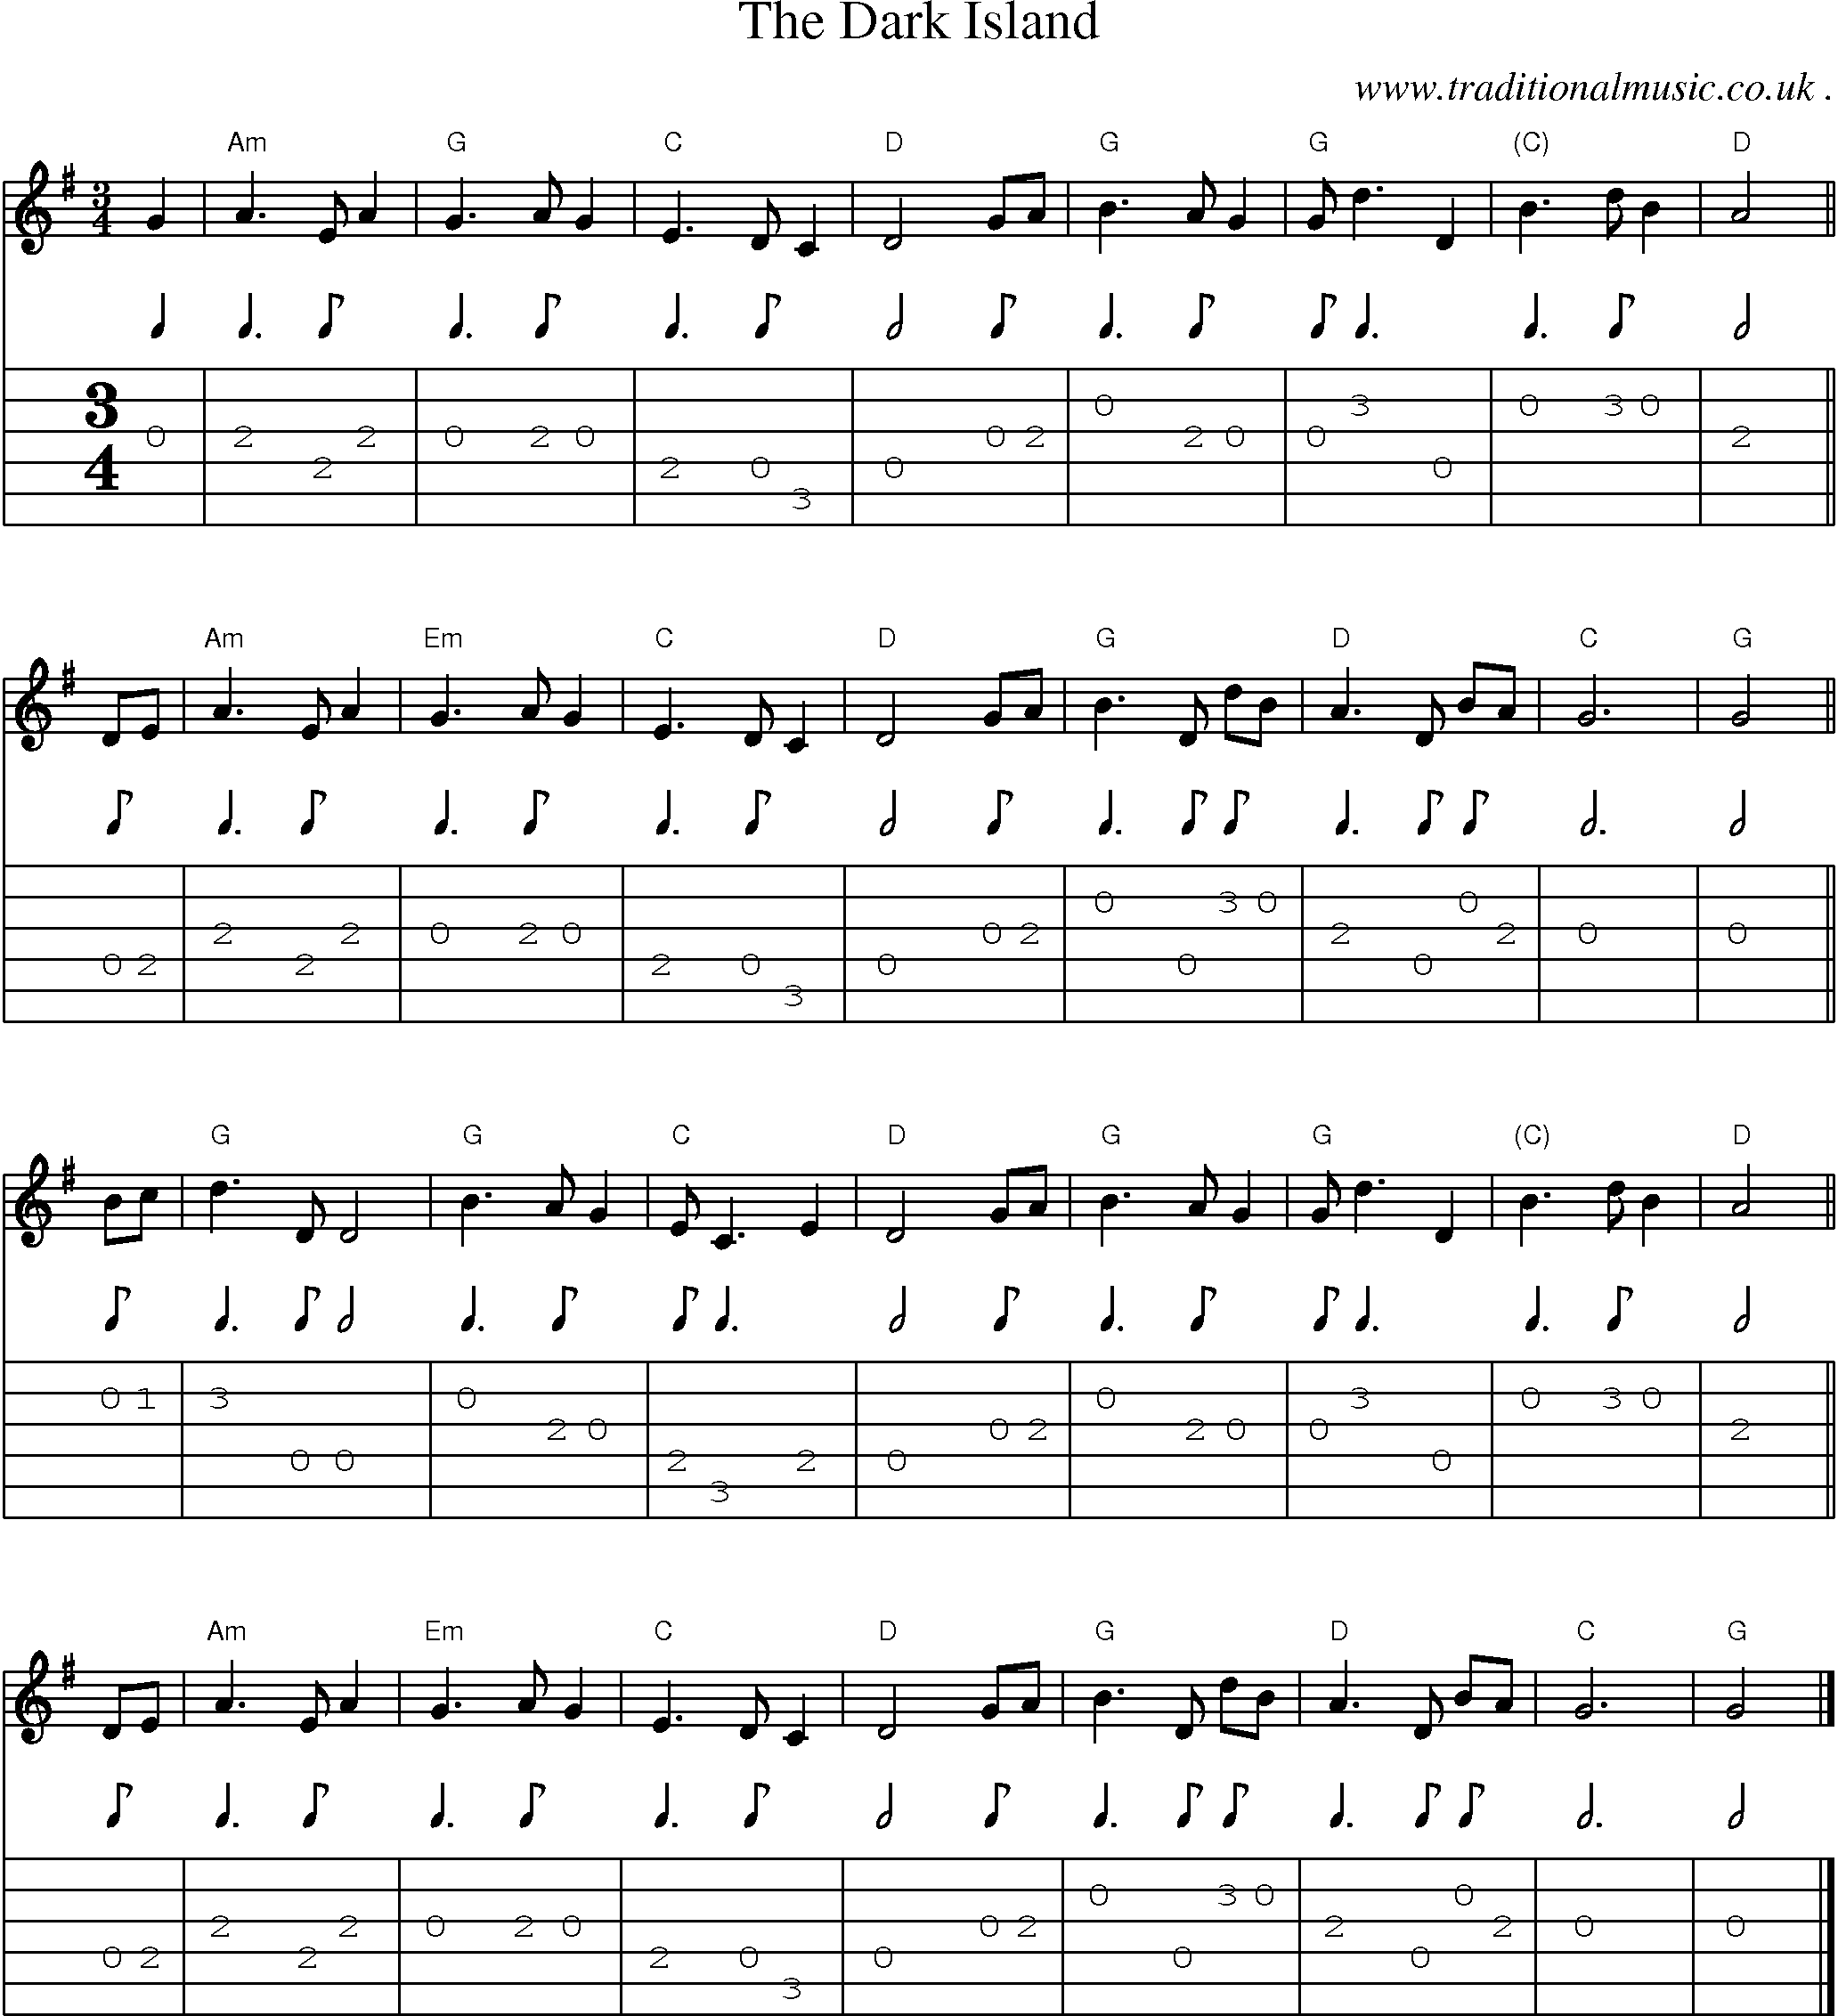 Sheet-music  score, Chords and Guitar Tabs for The Dark Island